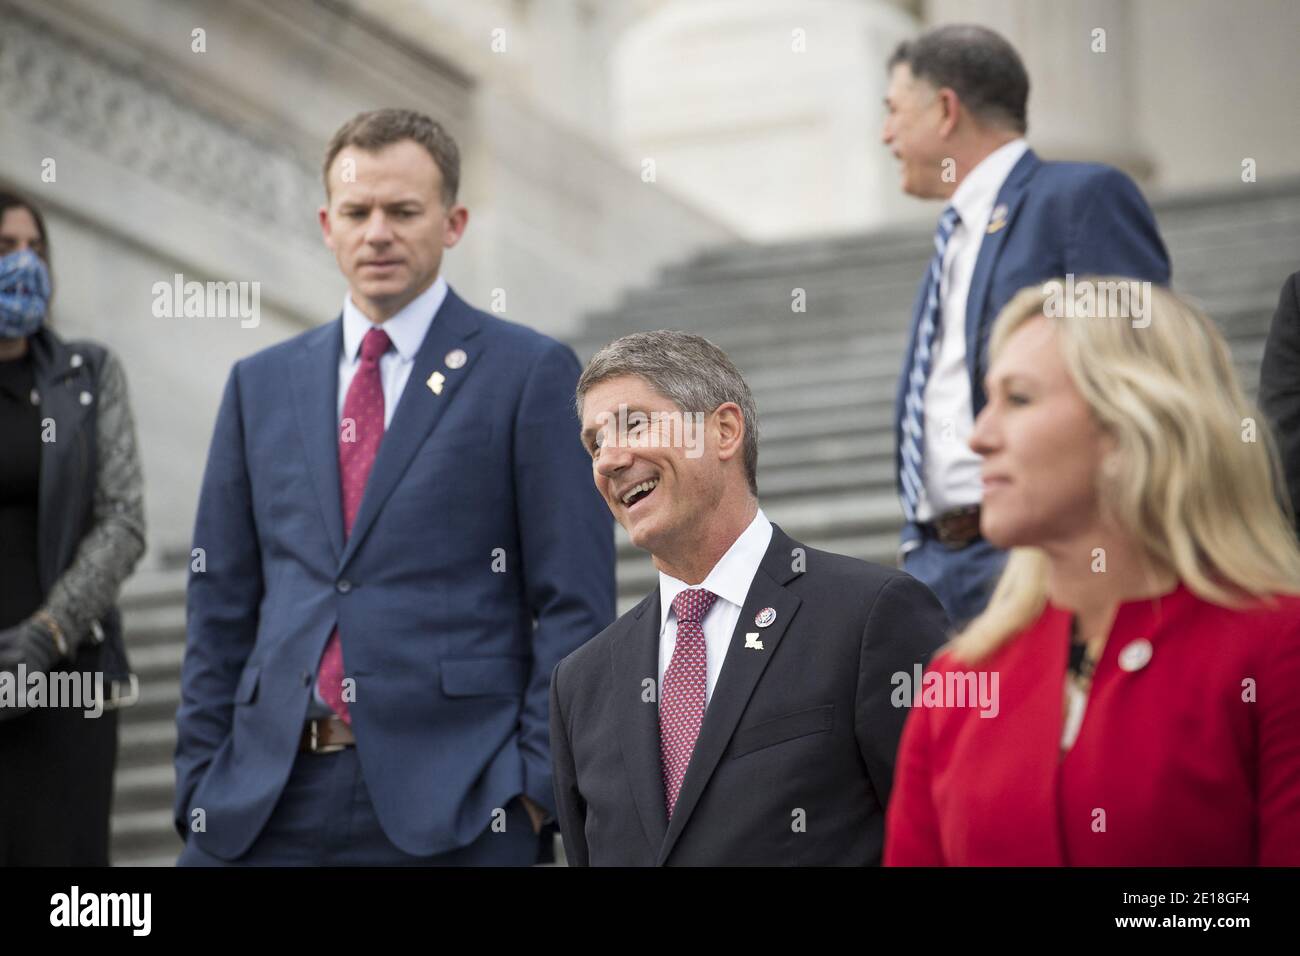 United States Representative Scott Franklin (Republican of Florida) joins other freshmen GOP members of Congress for a group photograph on the East Front Steps of the U.S. Capitol in Washington, DC, Monday January 4, 2021. Photo by Rod Lamkey/CNP/ABACAPRESS.COM Stock Photo